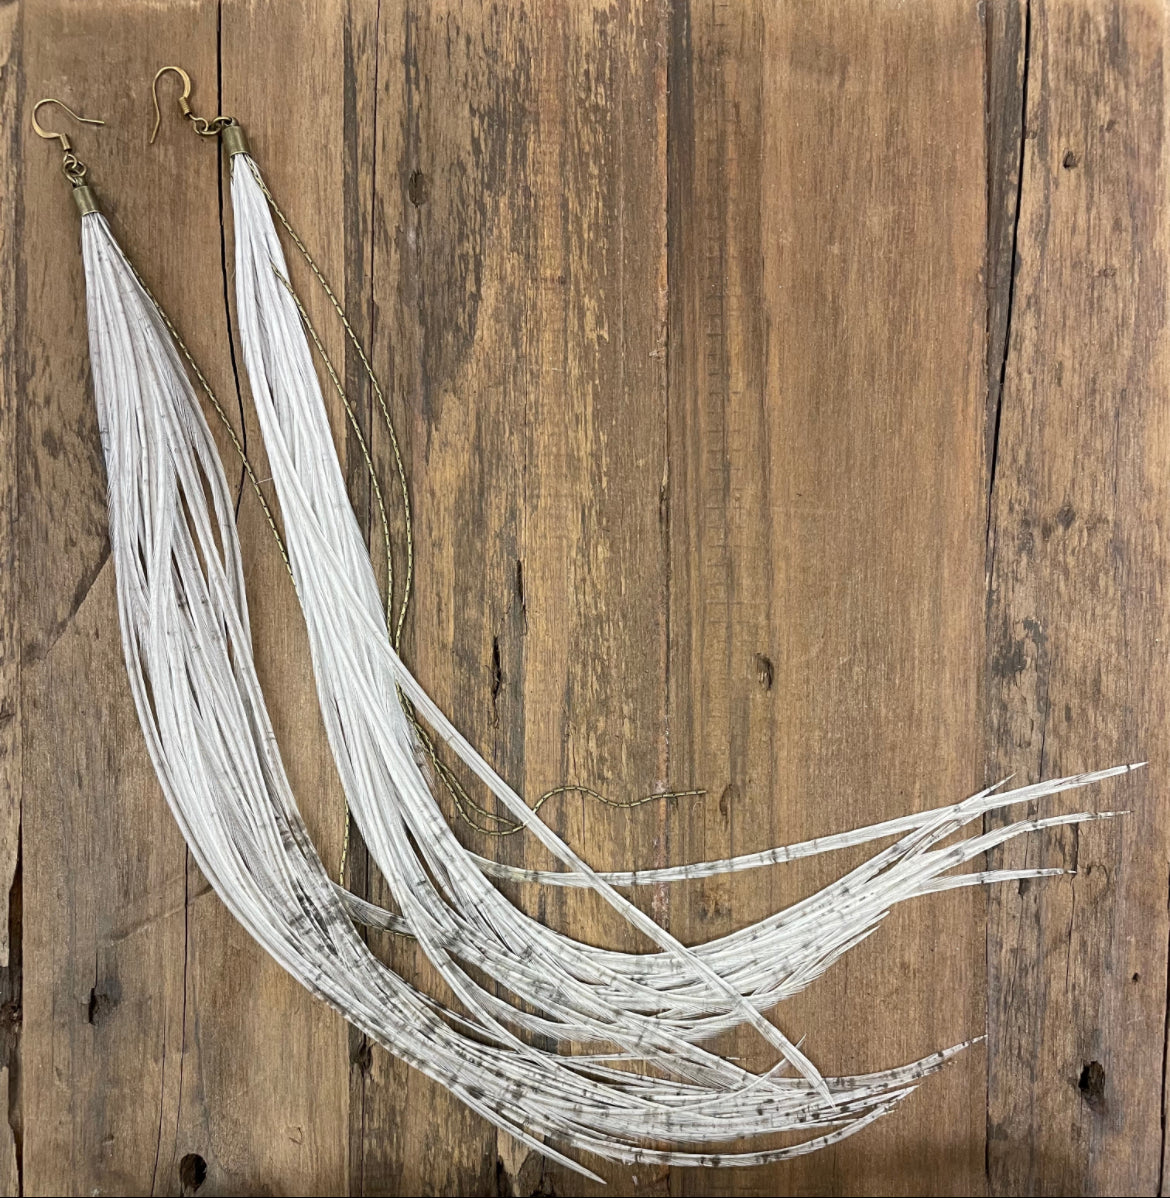 Extra Long 'Silver' Feather Earrings